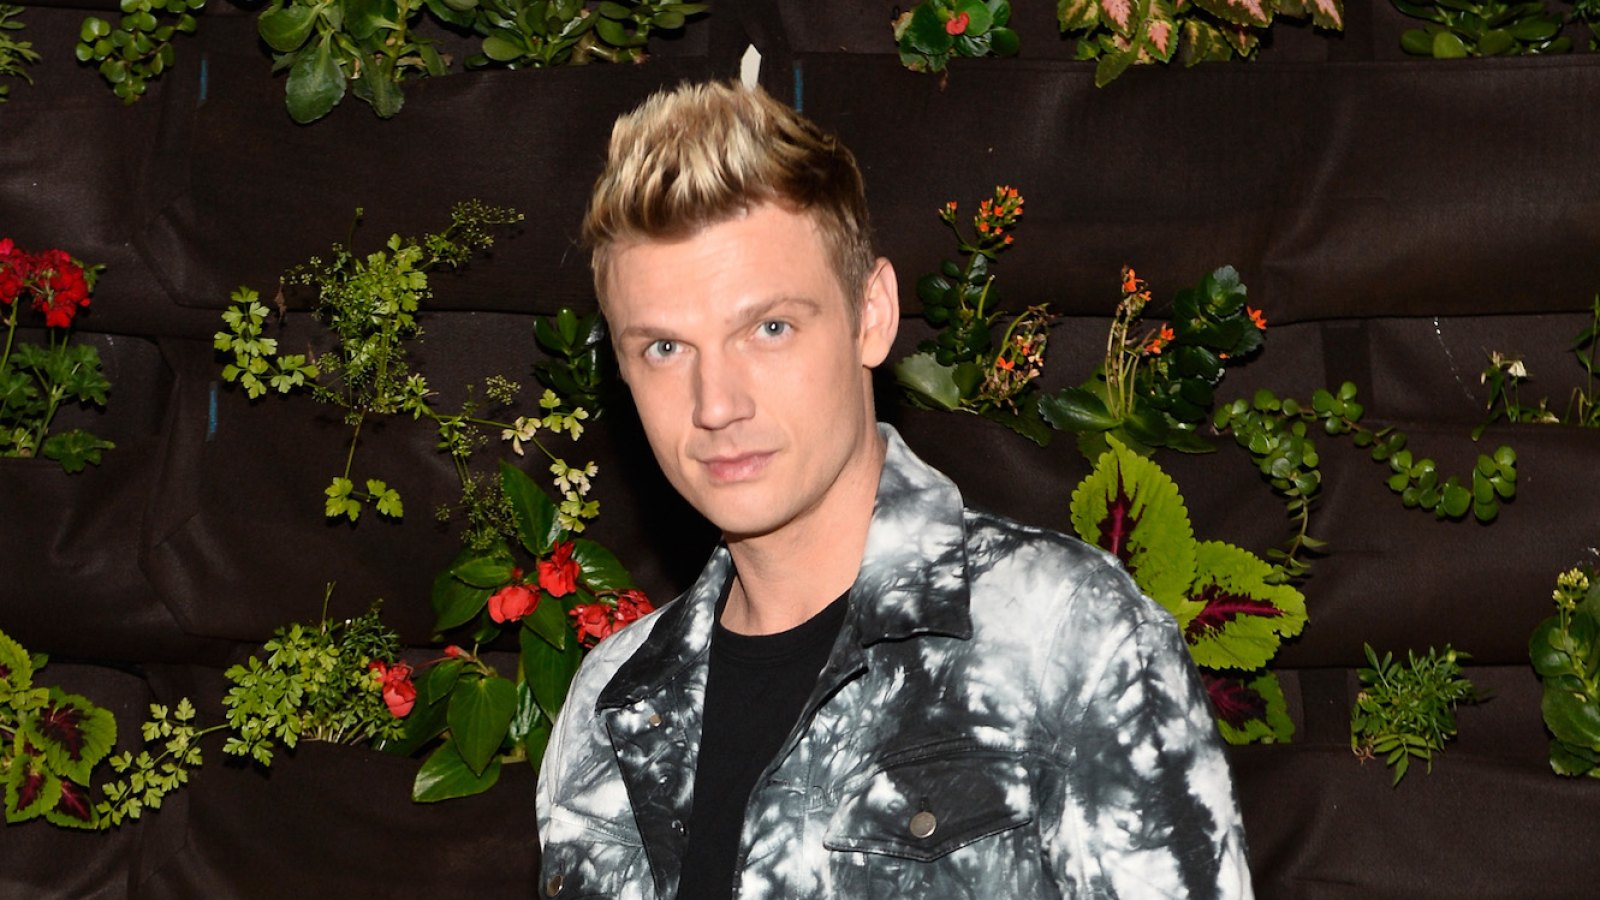 Nick Carter Accused of Sexually Assaulting 15-Year-Old on a Yacht